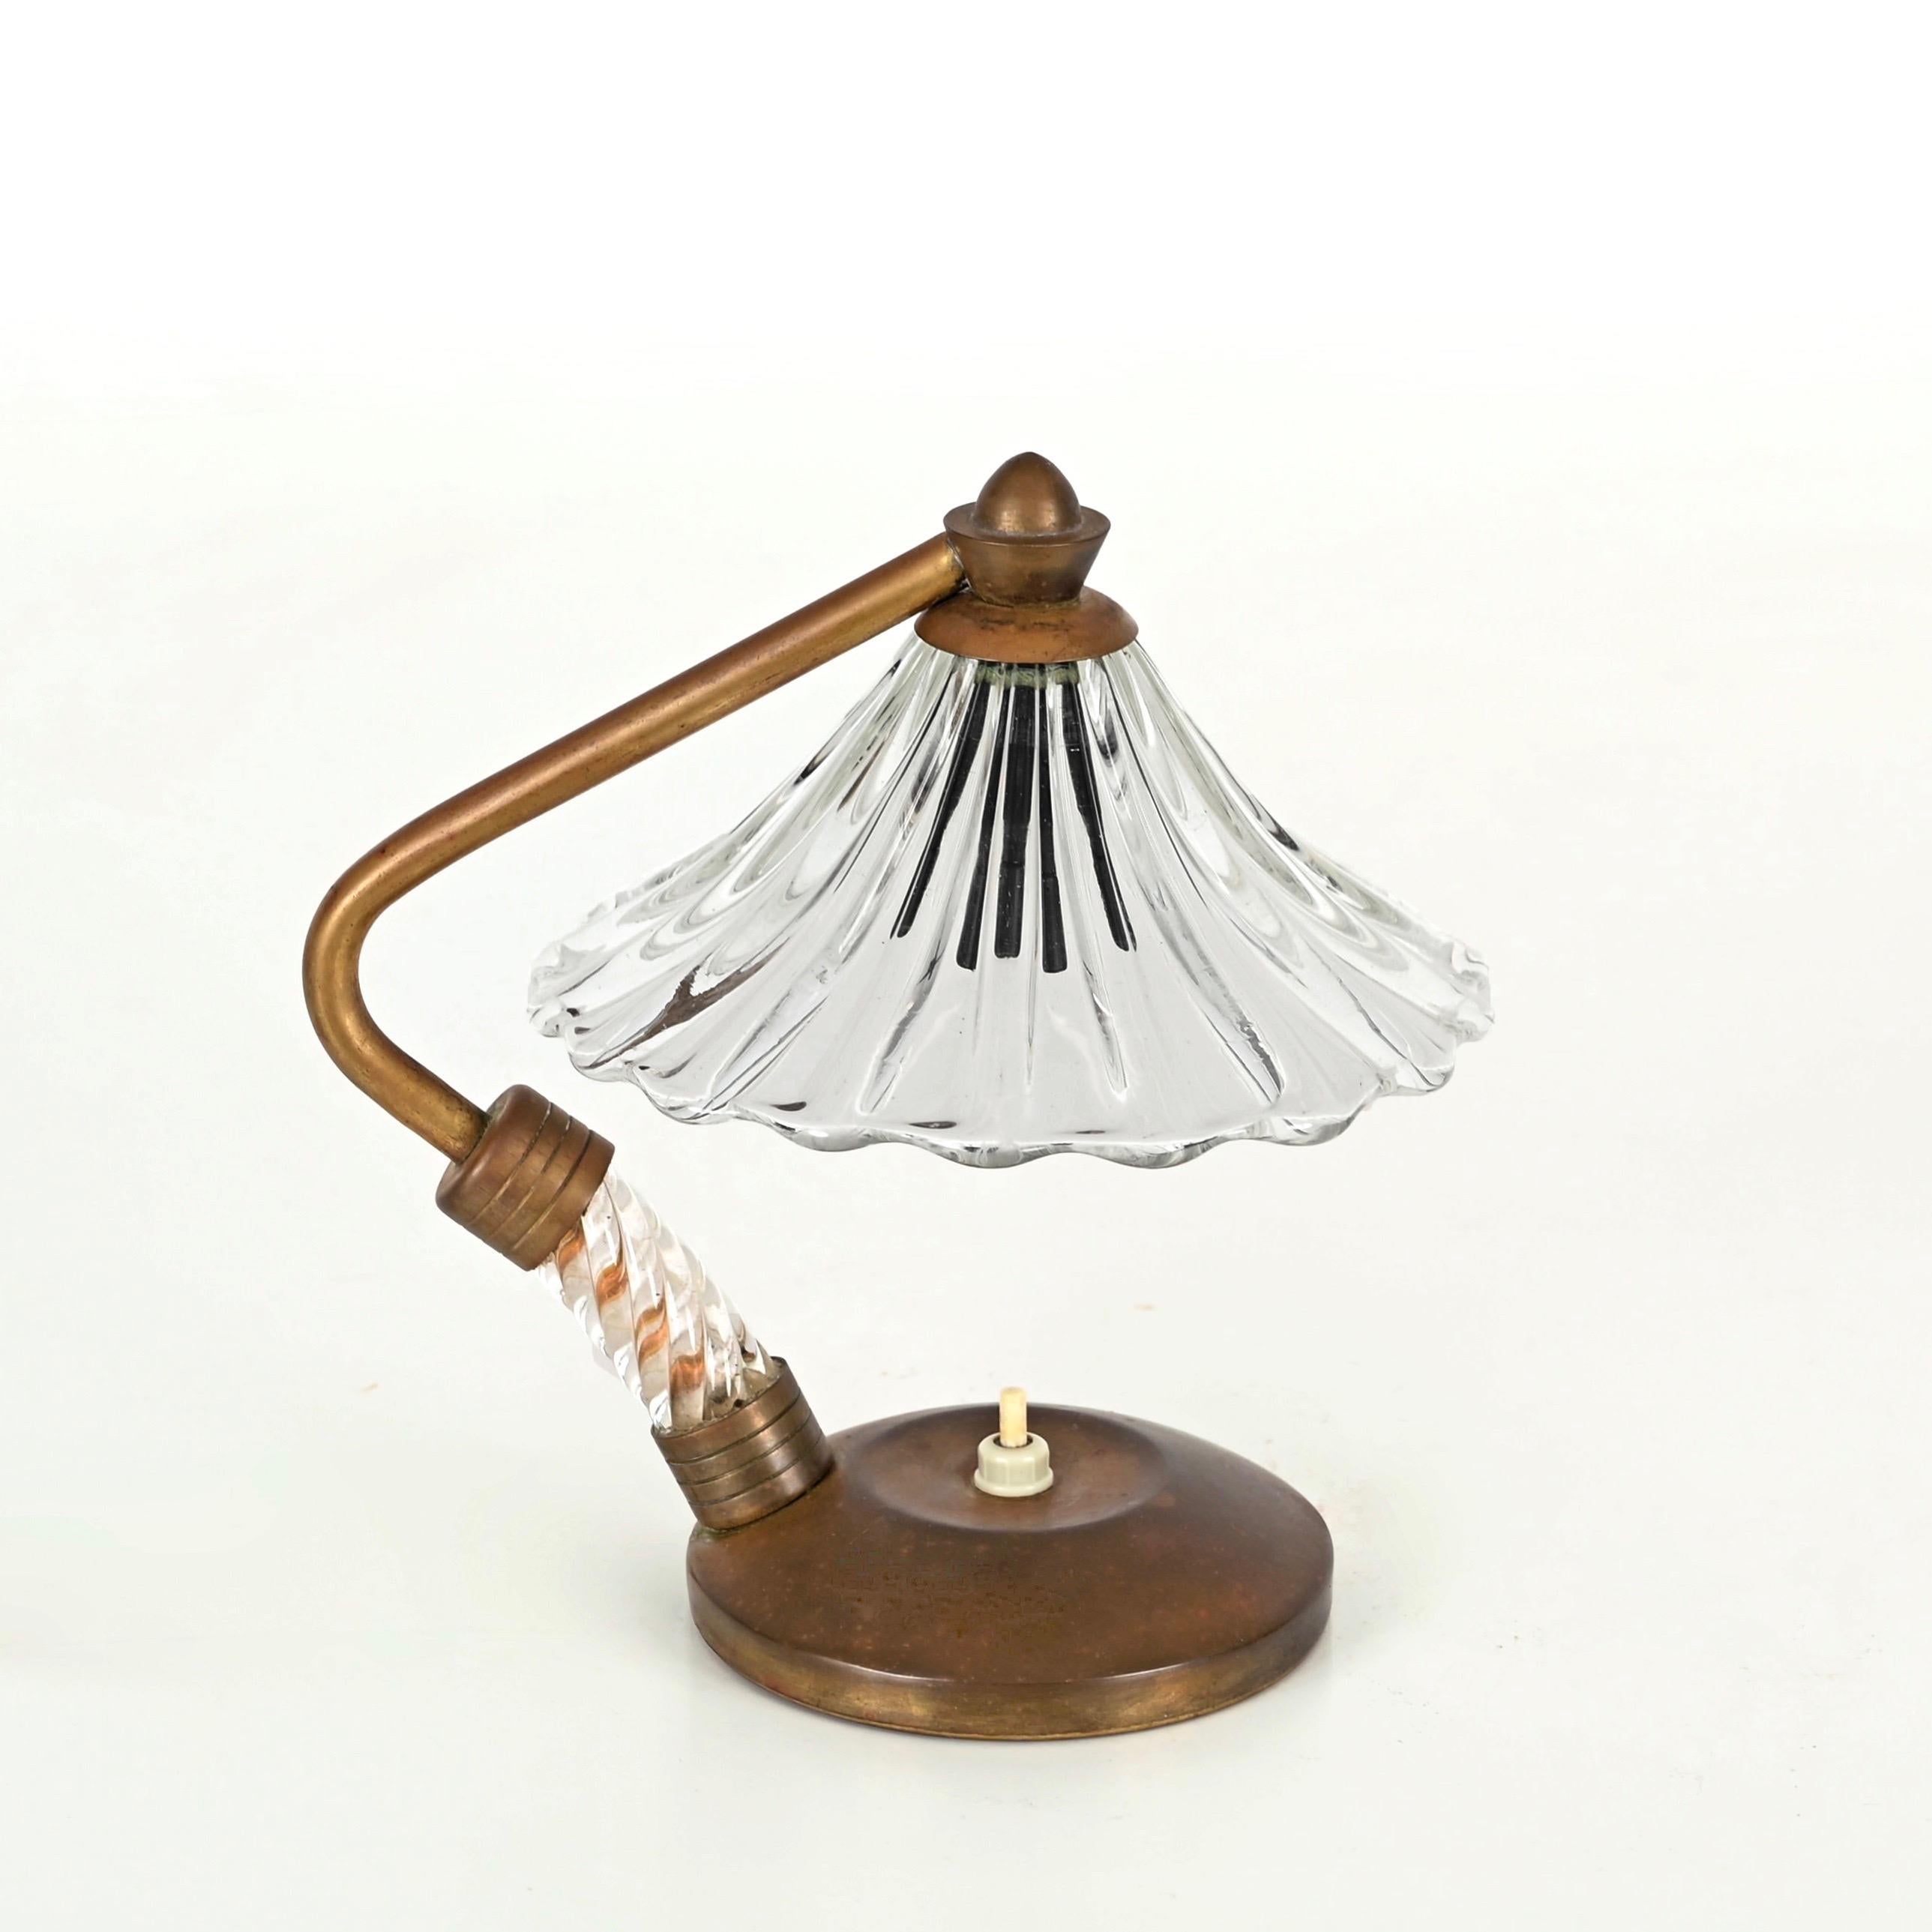 Bellflower Table Lamp in Murano Glass and Brass by Ercole Barovier, Italy 1940s For Sale 2